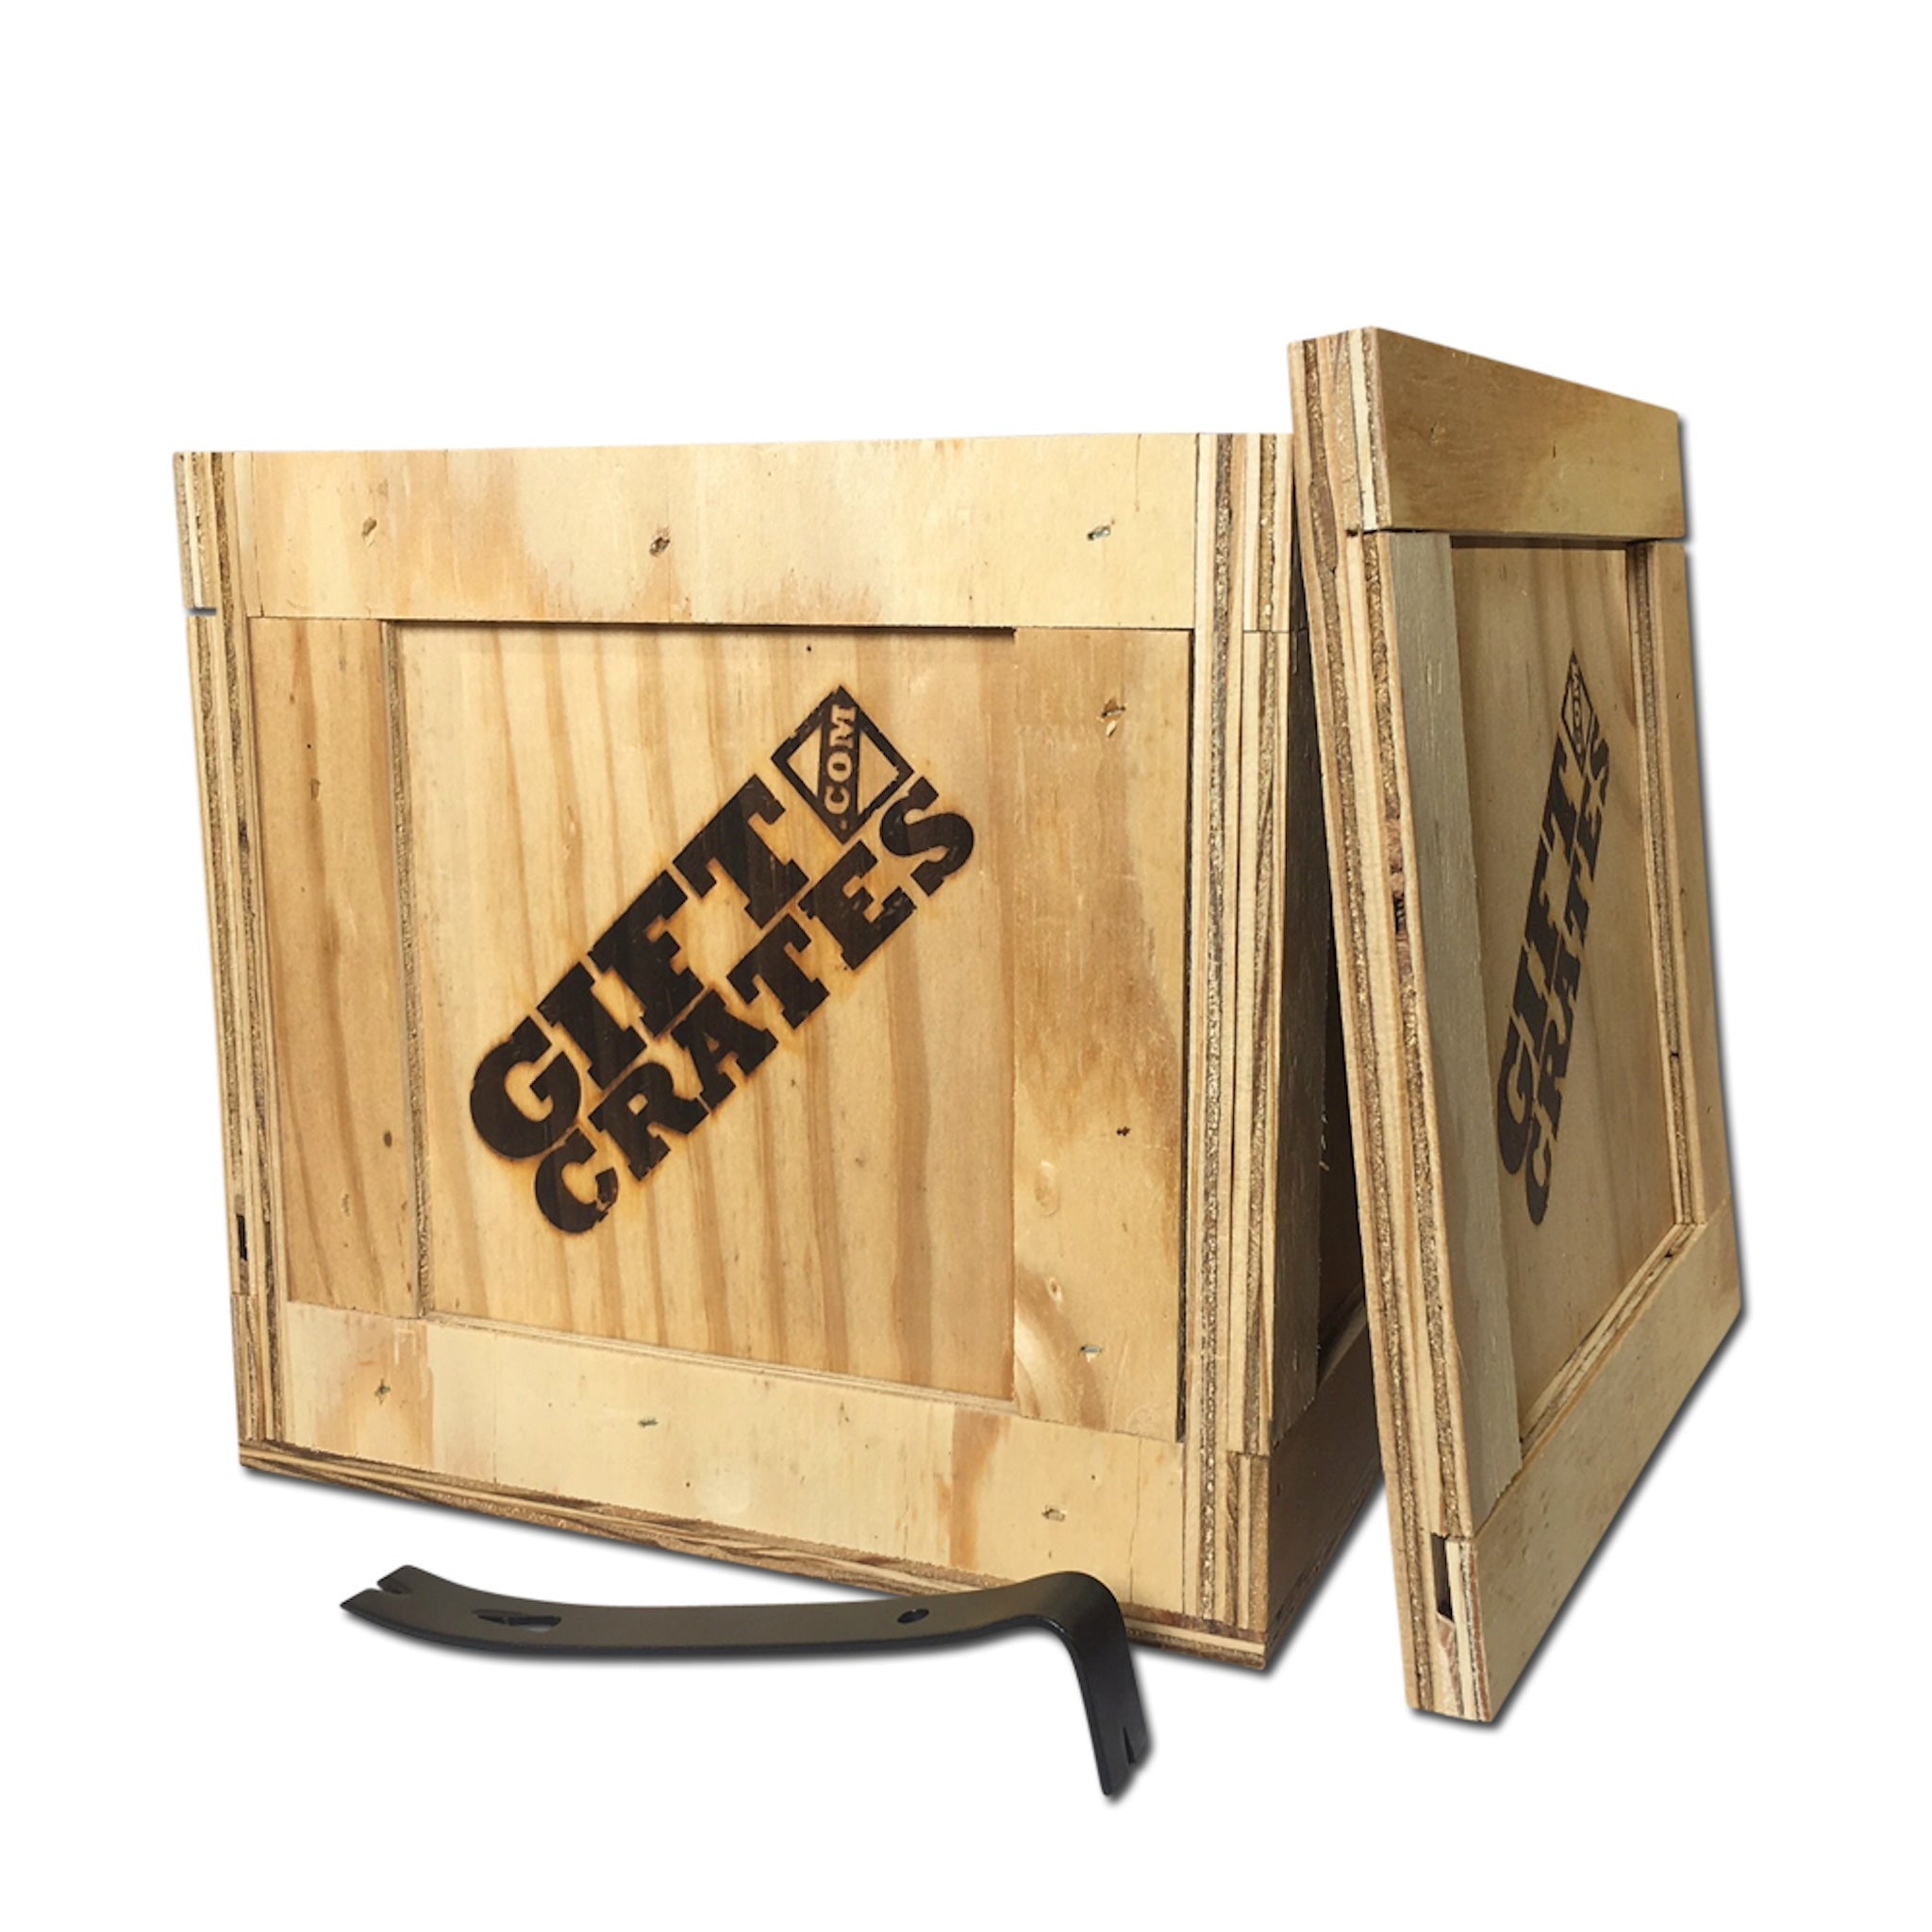 Coffee Pour Over Crate